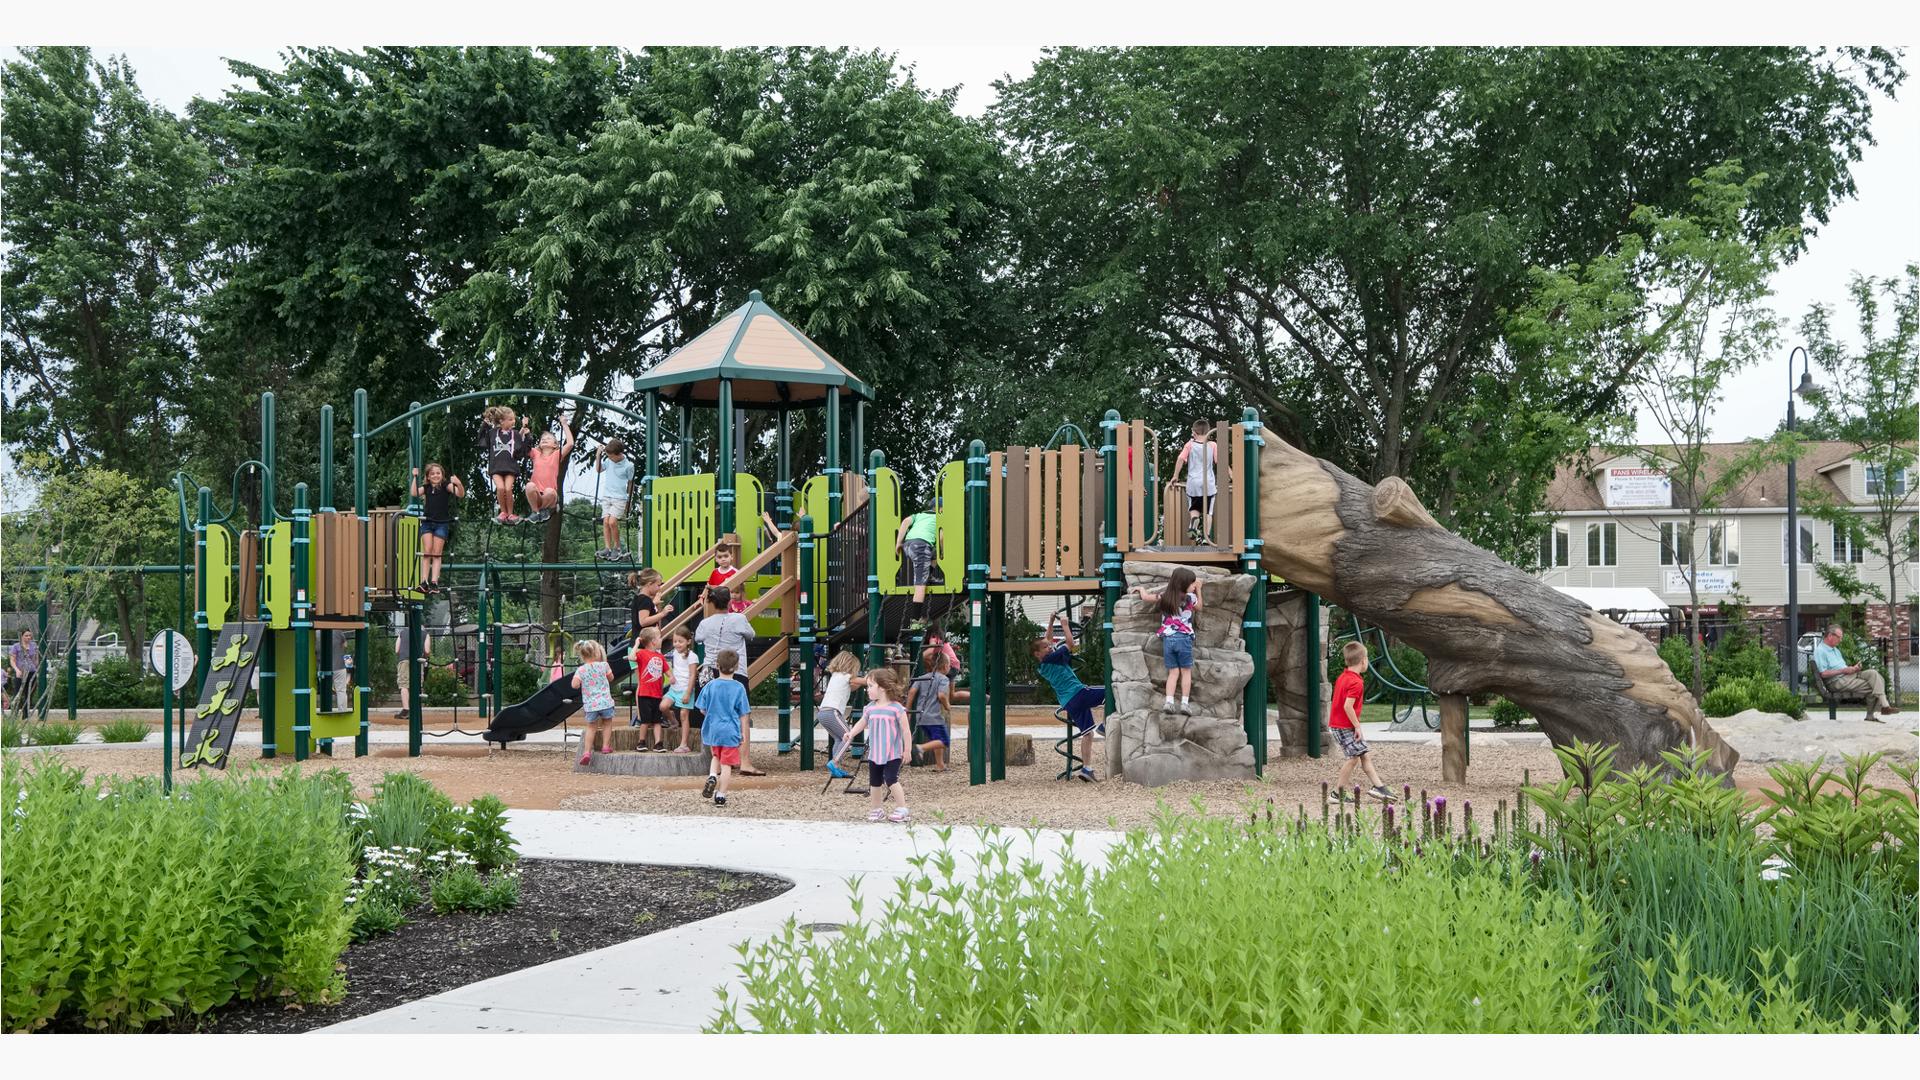 Nature inspired playground featuring log slide and fake rock climbing walls with young kids playing and climbing with tall trees and growing gardens surrounding the play space.